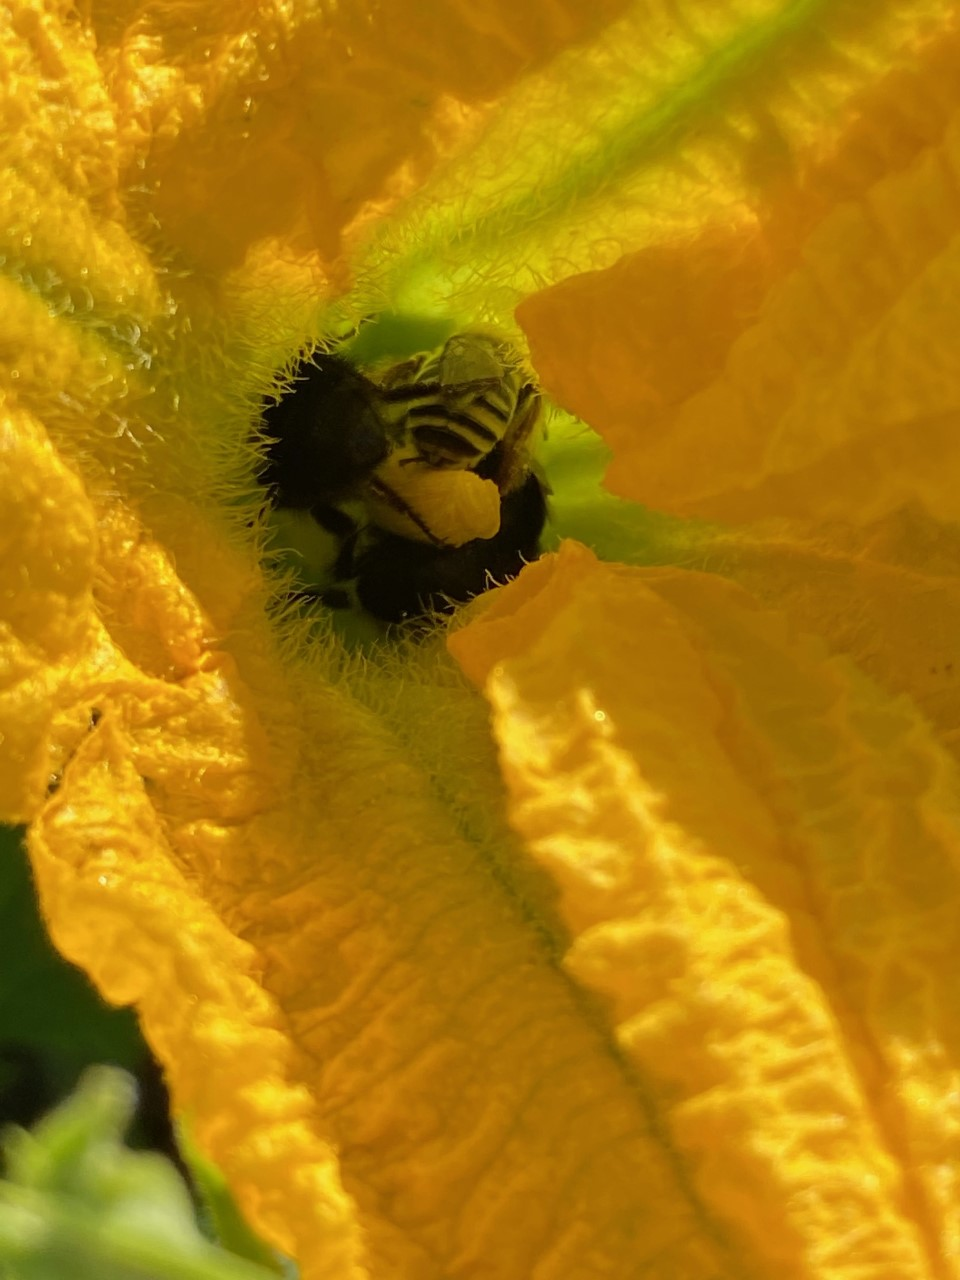 Two fuzzy, striped bees covered in pollen sit in a bright yellow flower, legs tangled together. 